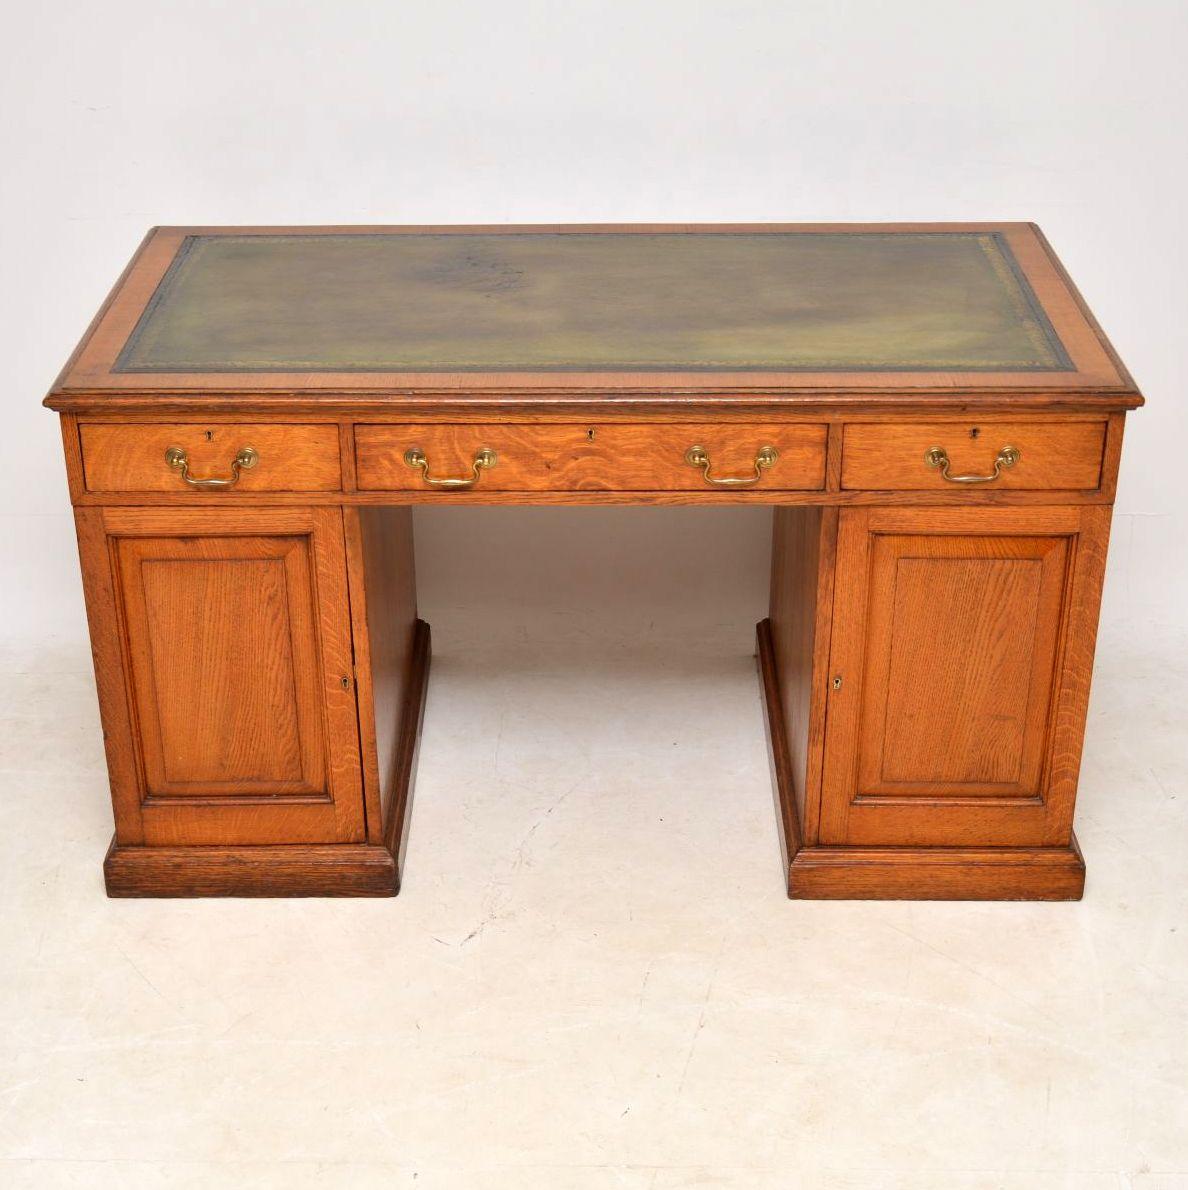 This antique Victorian pedestal desk is solid oak and is designed a bit different from the usual model. It has a lovely golden oak color and is in excellent condition having just been polished. The leather writing surface is hand coloured with a